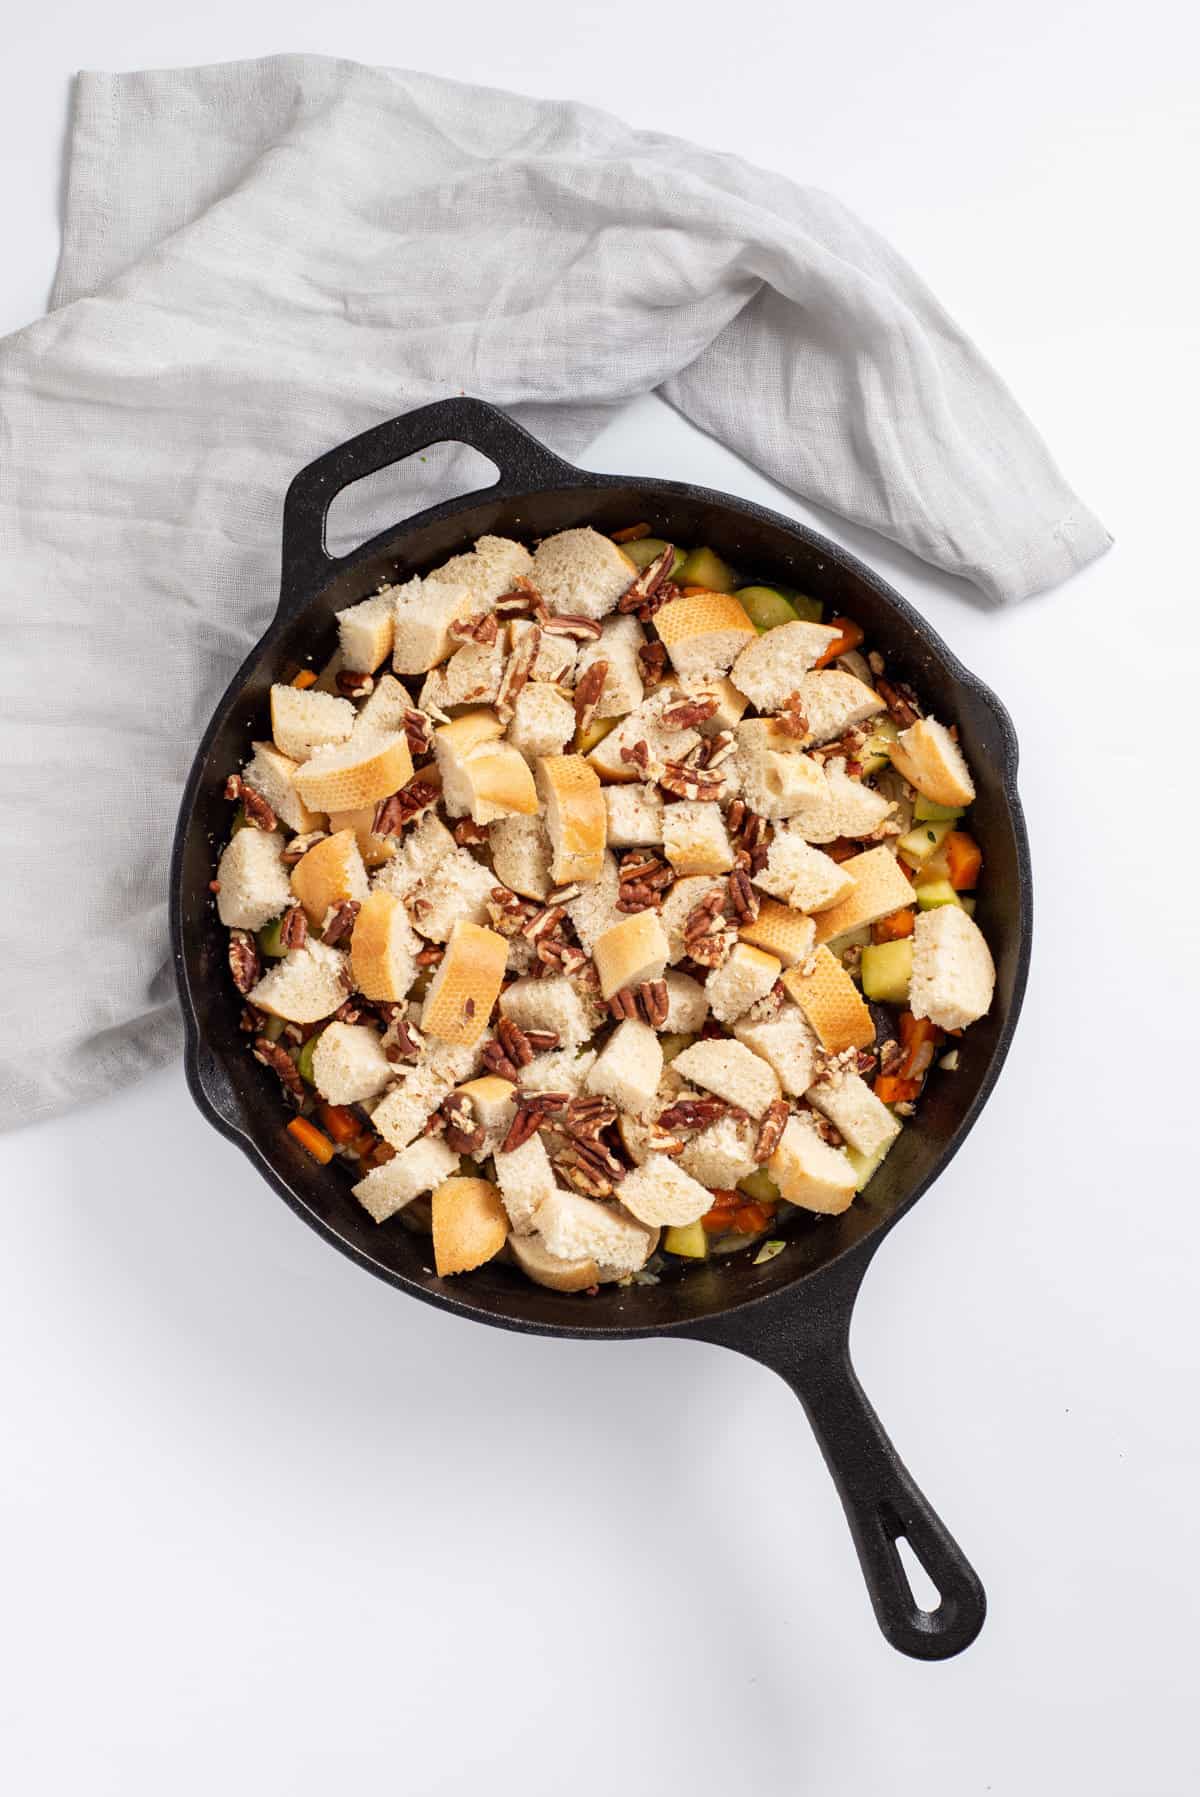 Overhead view of skillet with pecans and bread added in.